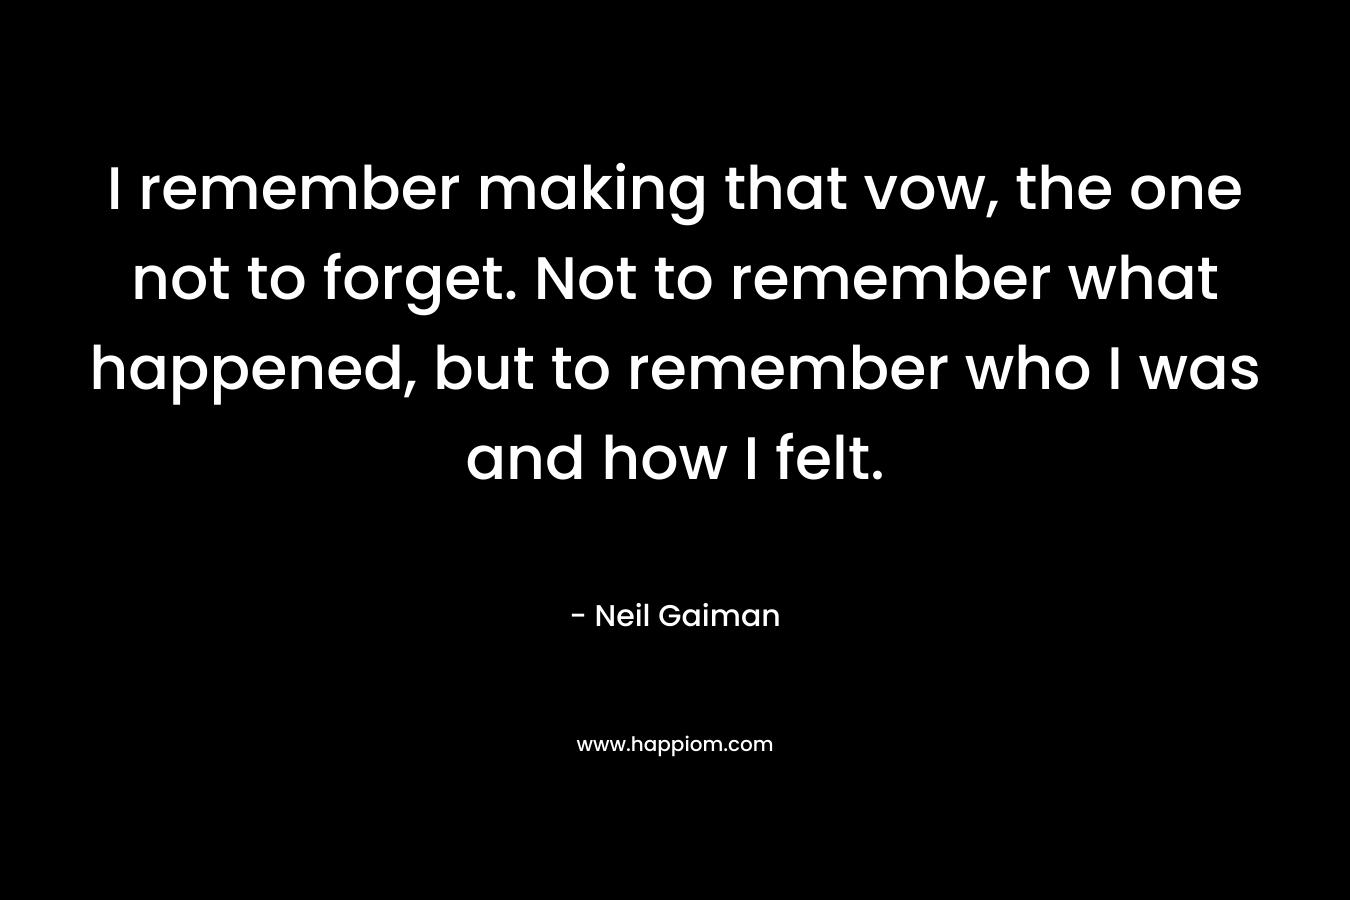 I remember making that vow, the one not to forget. Not to remember what happened, but to remember who I was and how I felt. – Neil Gaiman